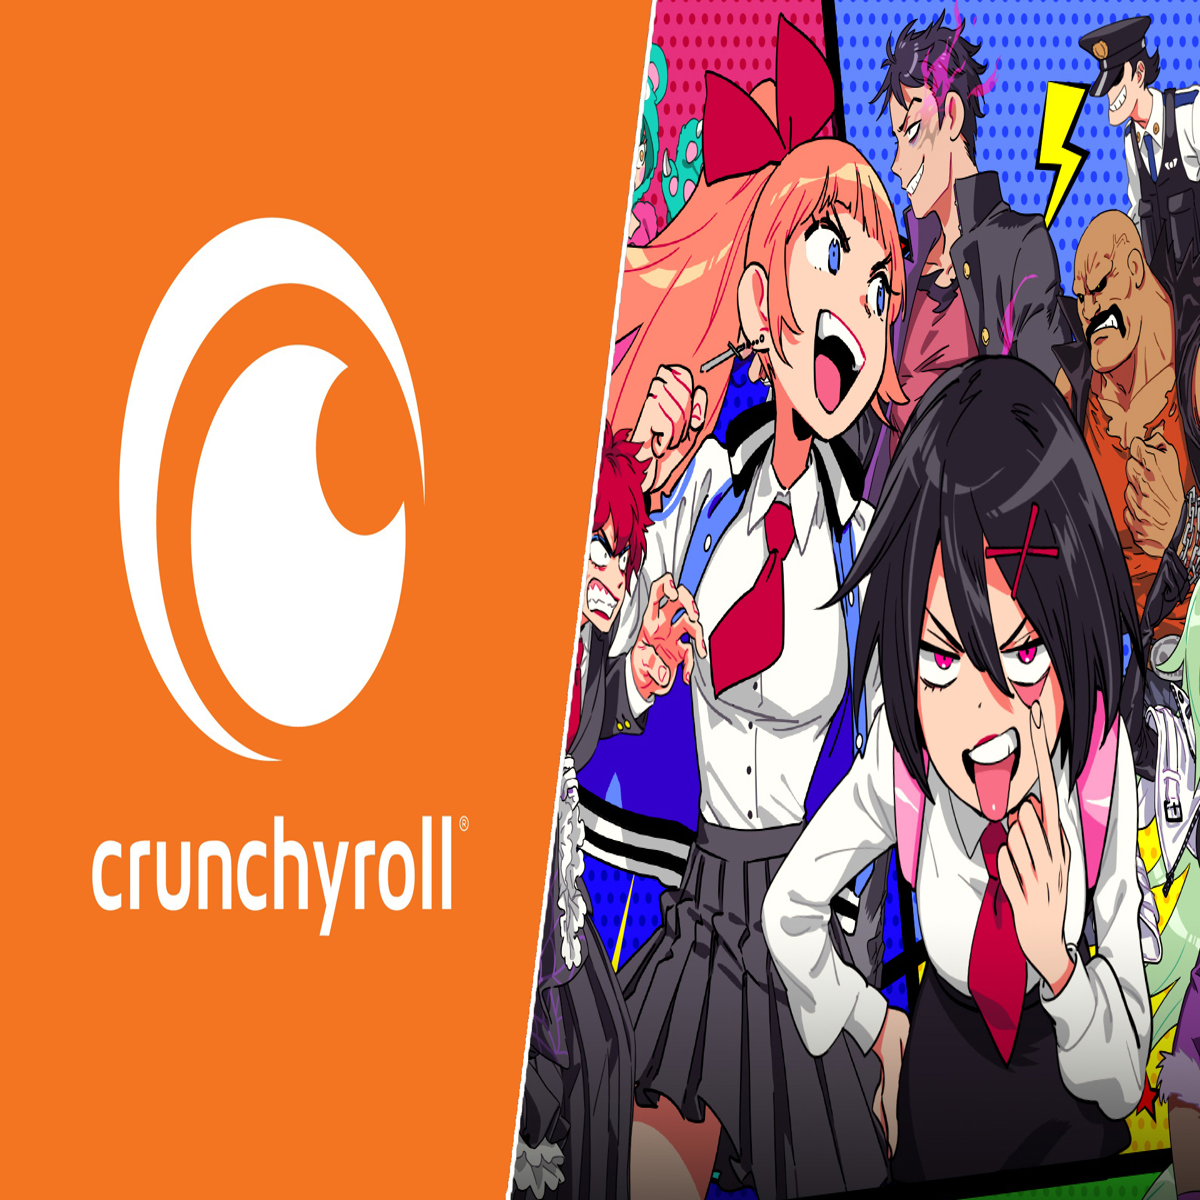 How To Use Crunchyroll Features, Crunchyroll Complete App Guide